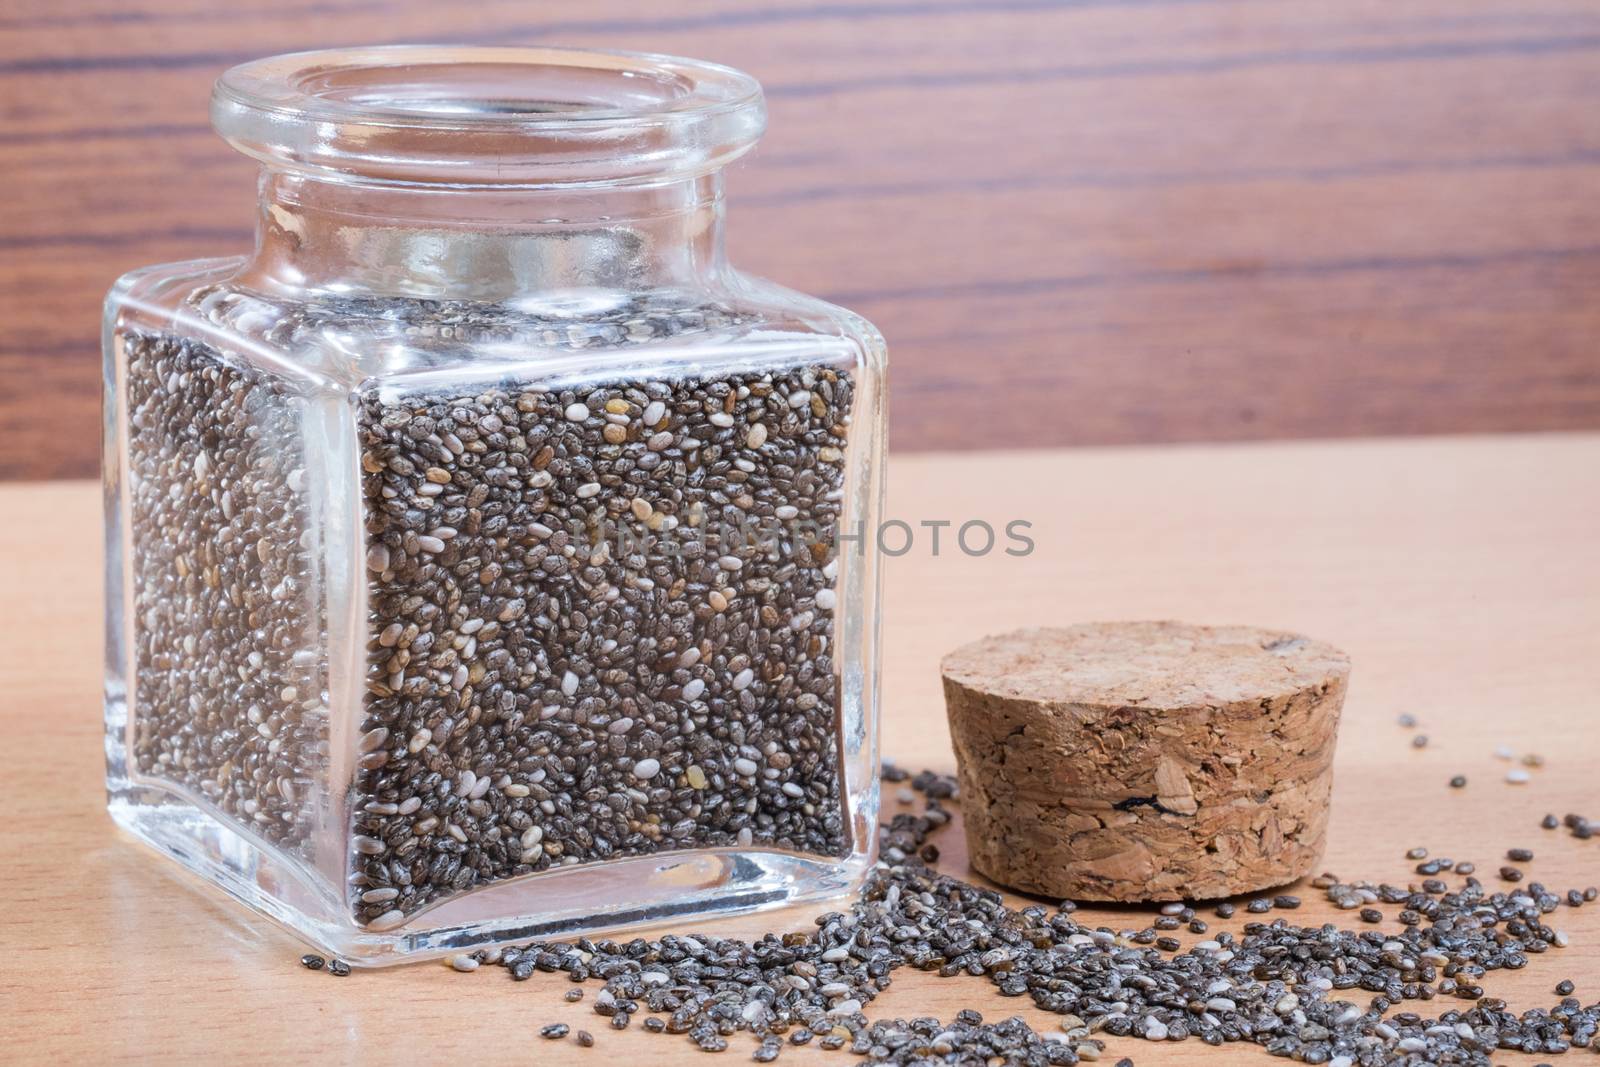 Chia seeds  by zneb076